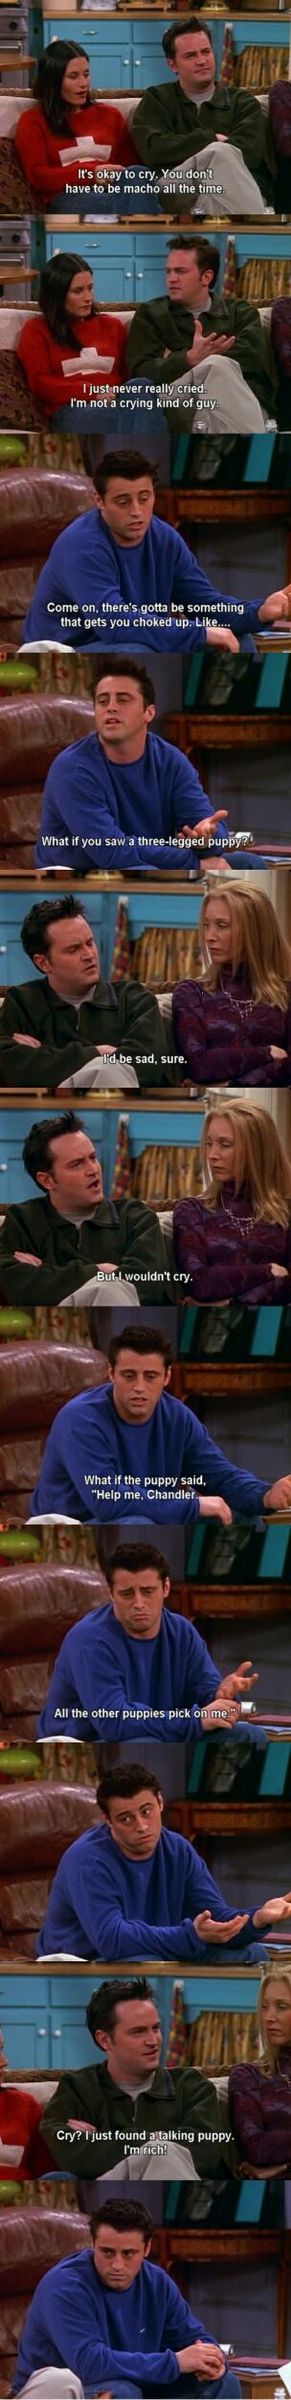 Chandler cant cry - meme